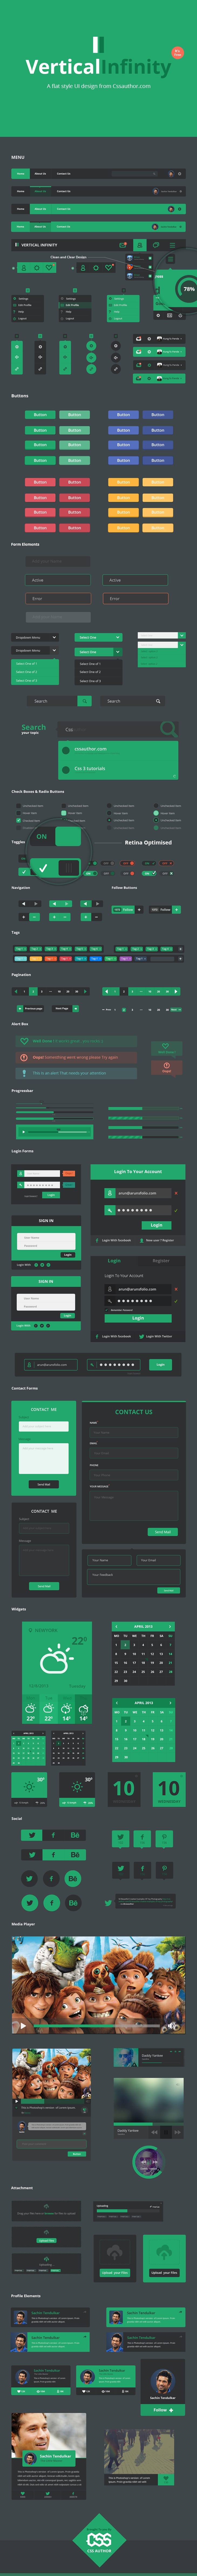 Vertical Infinity – A Mega Flat Style UI Kit PSD for Free Download - cssauthor.com